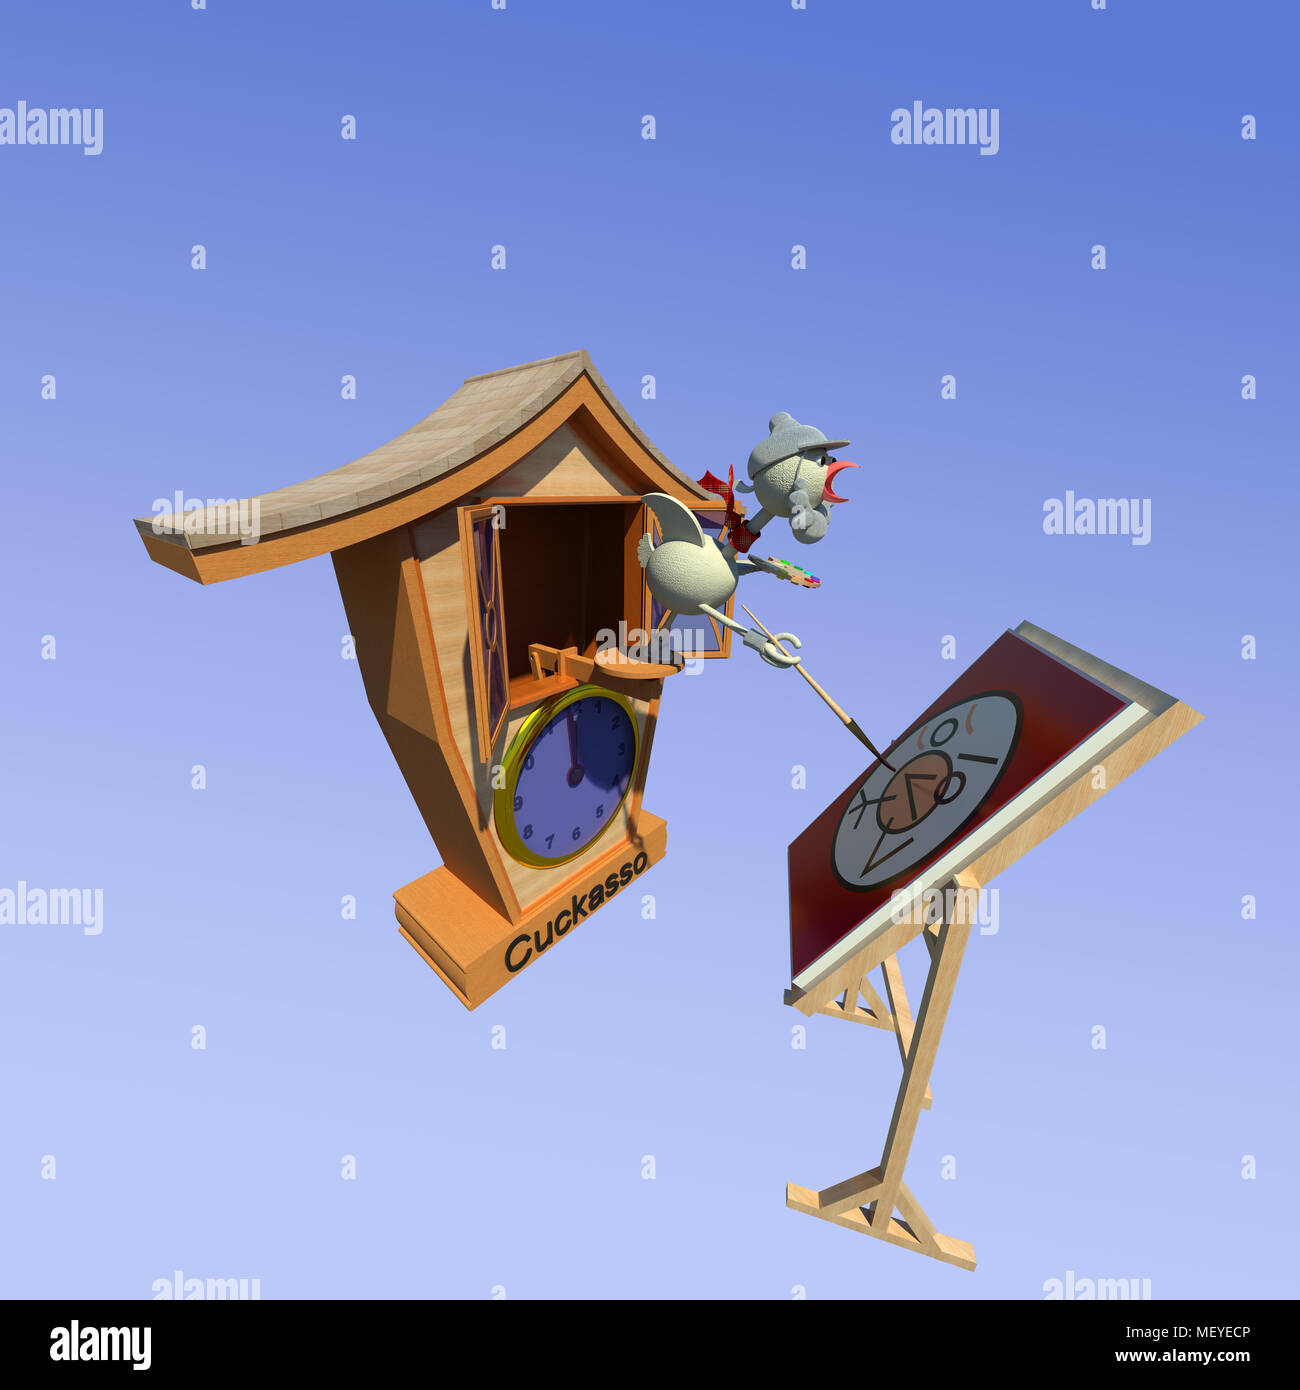 Cuckoo clock cuckoo bird artist painting self-portrait at his very young  age 3D illustration on gradient blue sky background. Collection Stock Photo  - Alamy